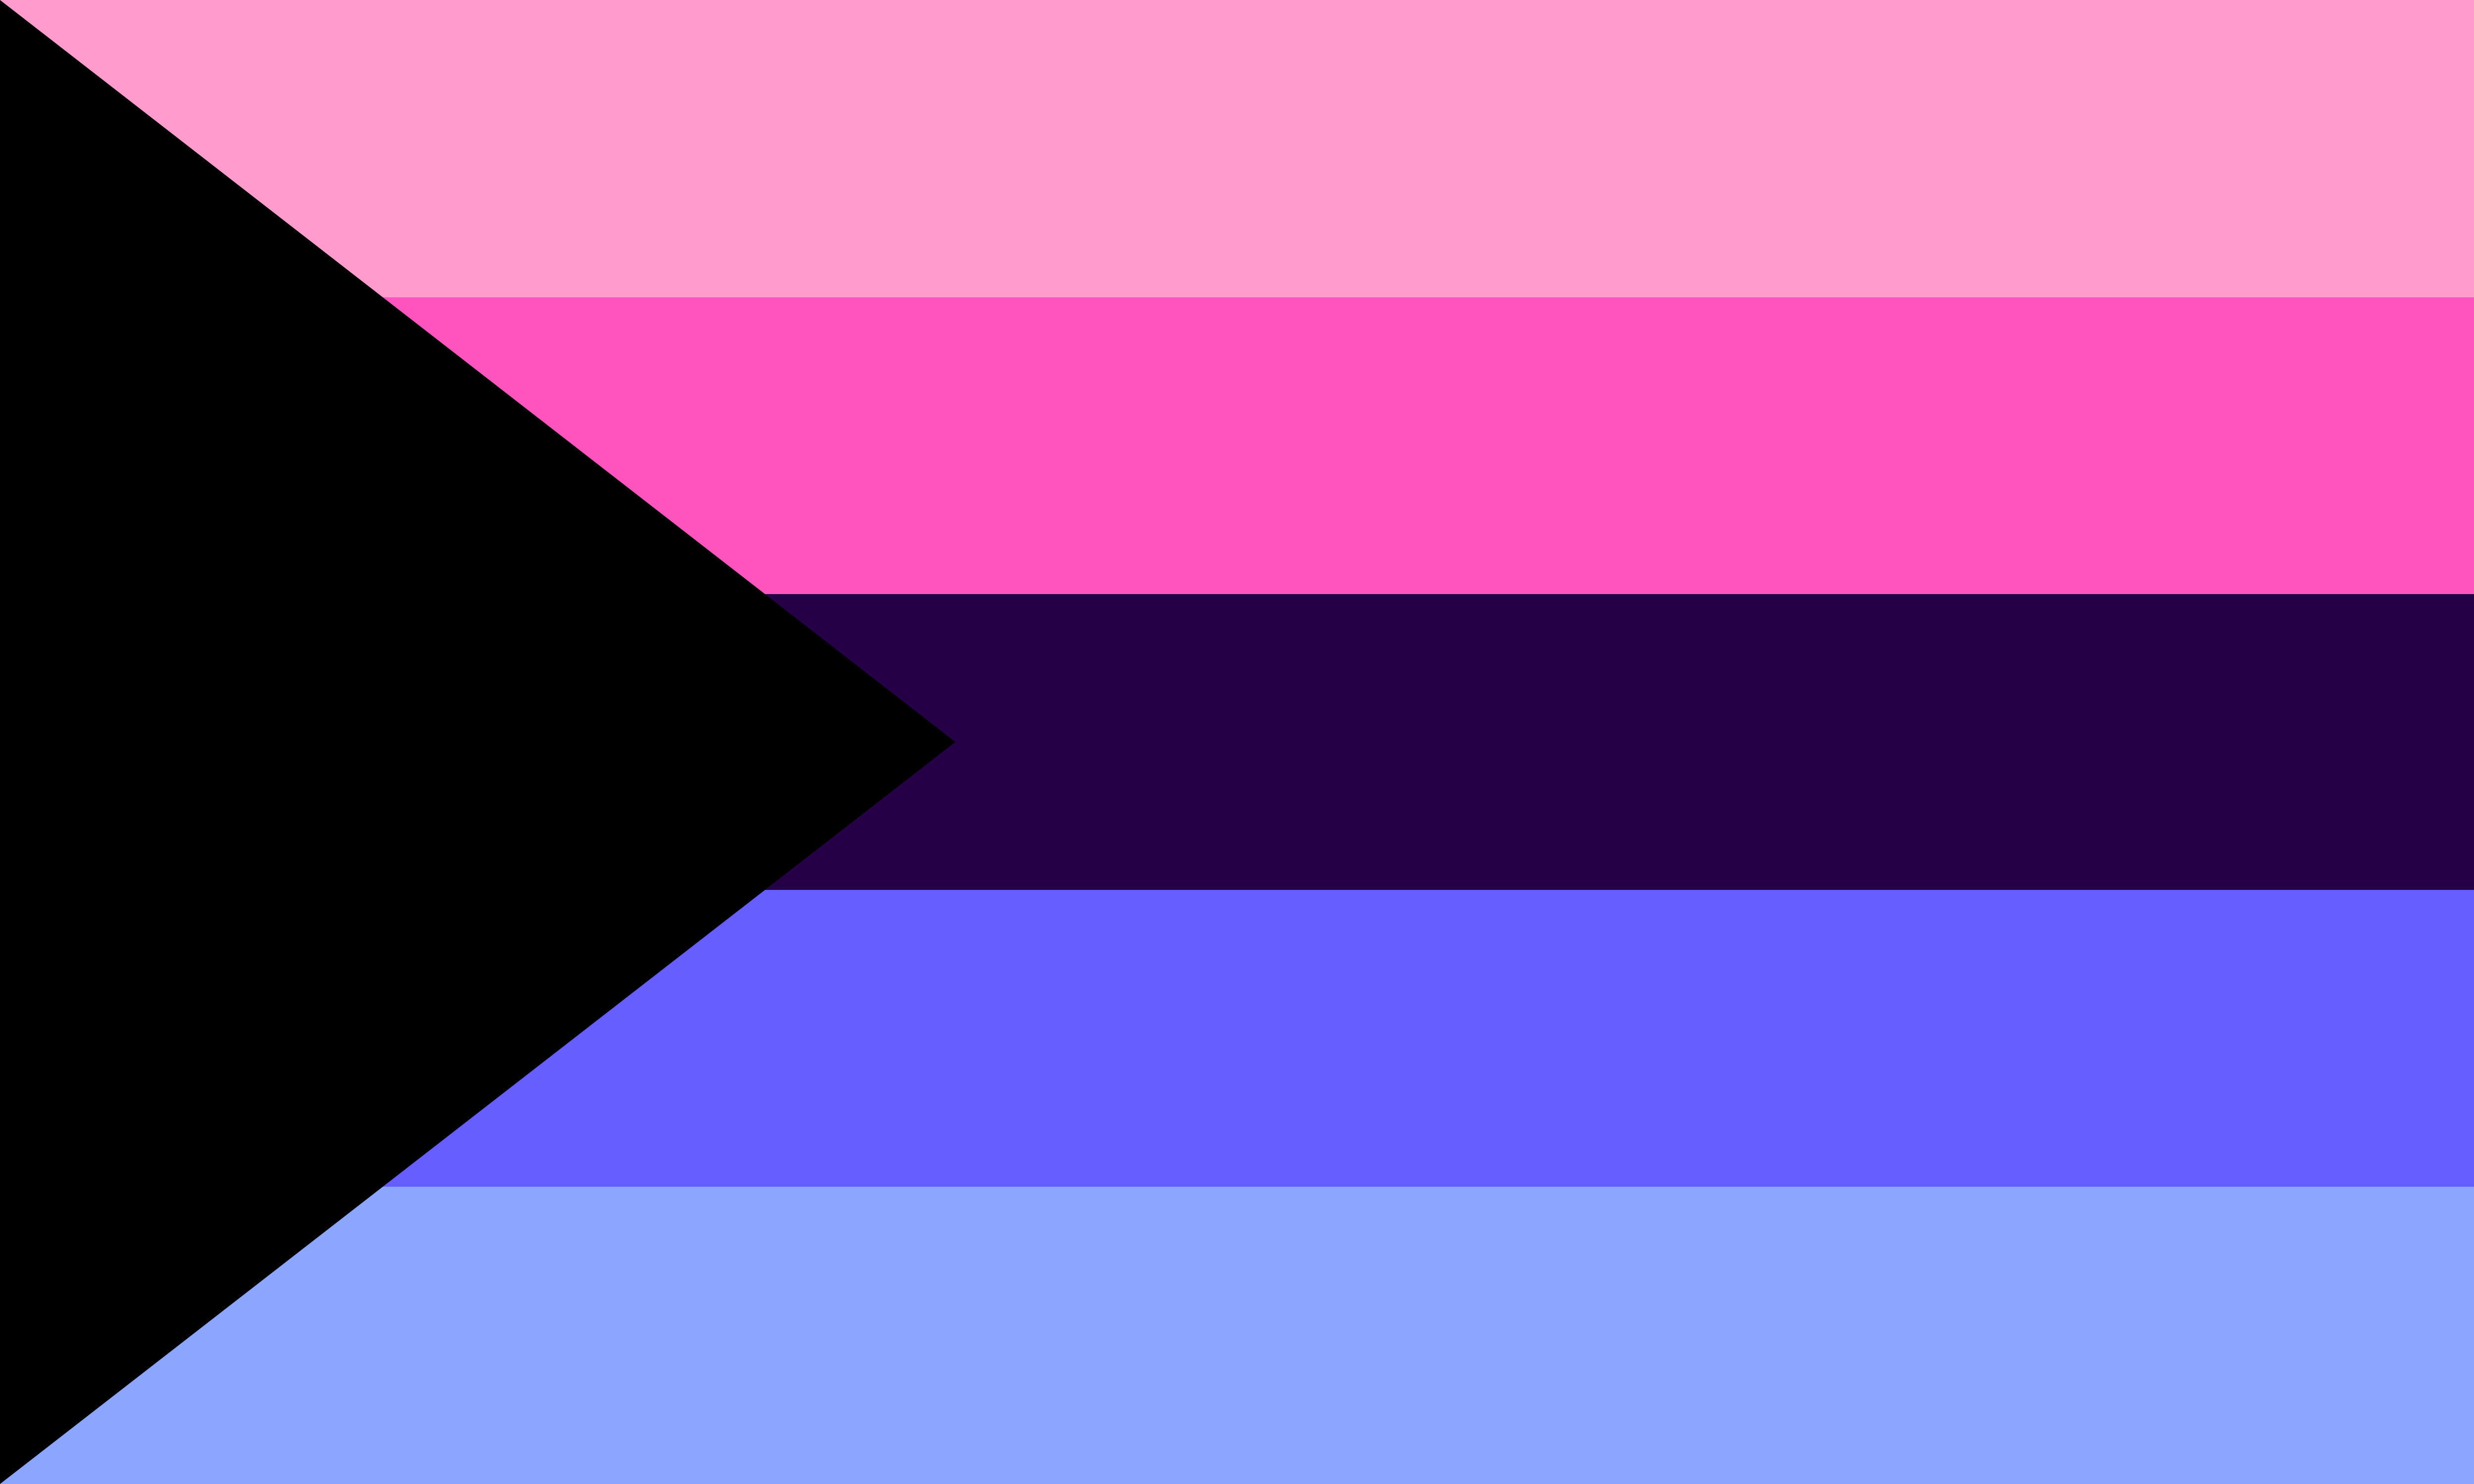 Omnisexual Flag Colors Meaning / Bigender Nonbinary Wiki : What do the.